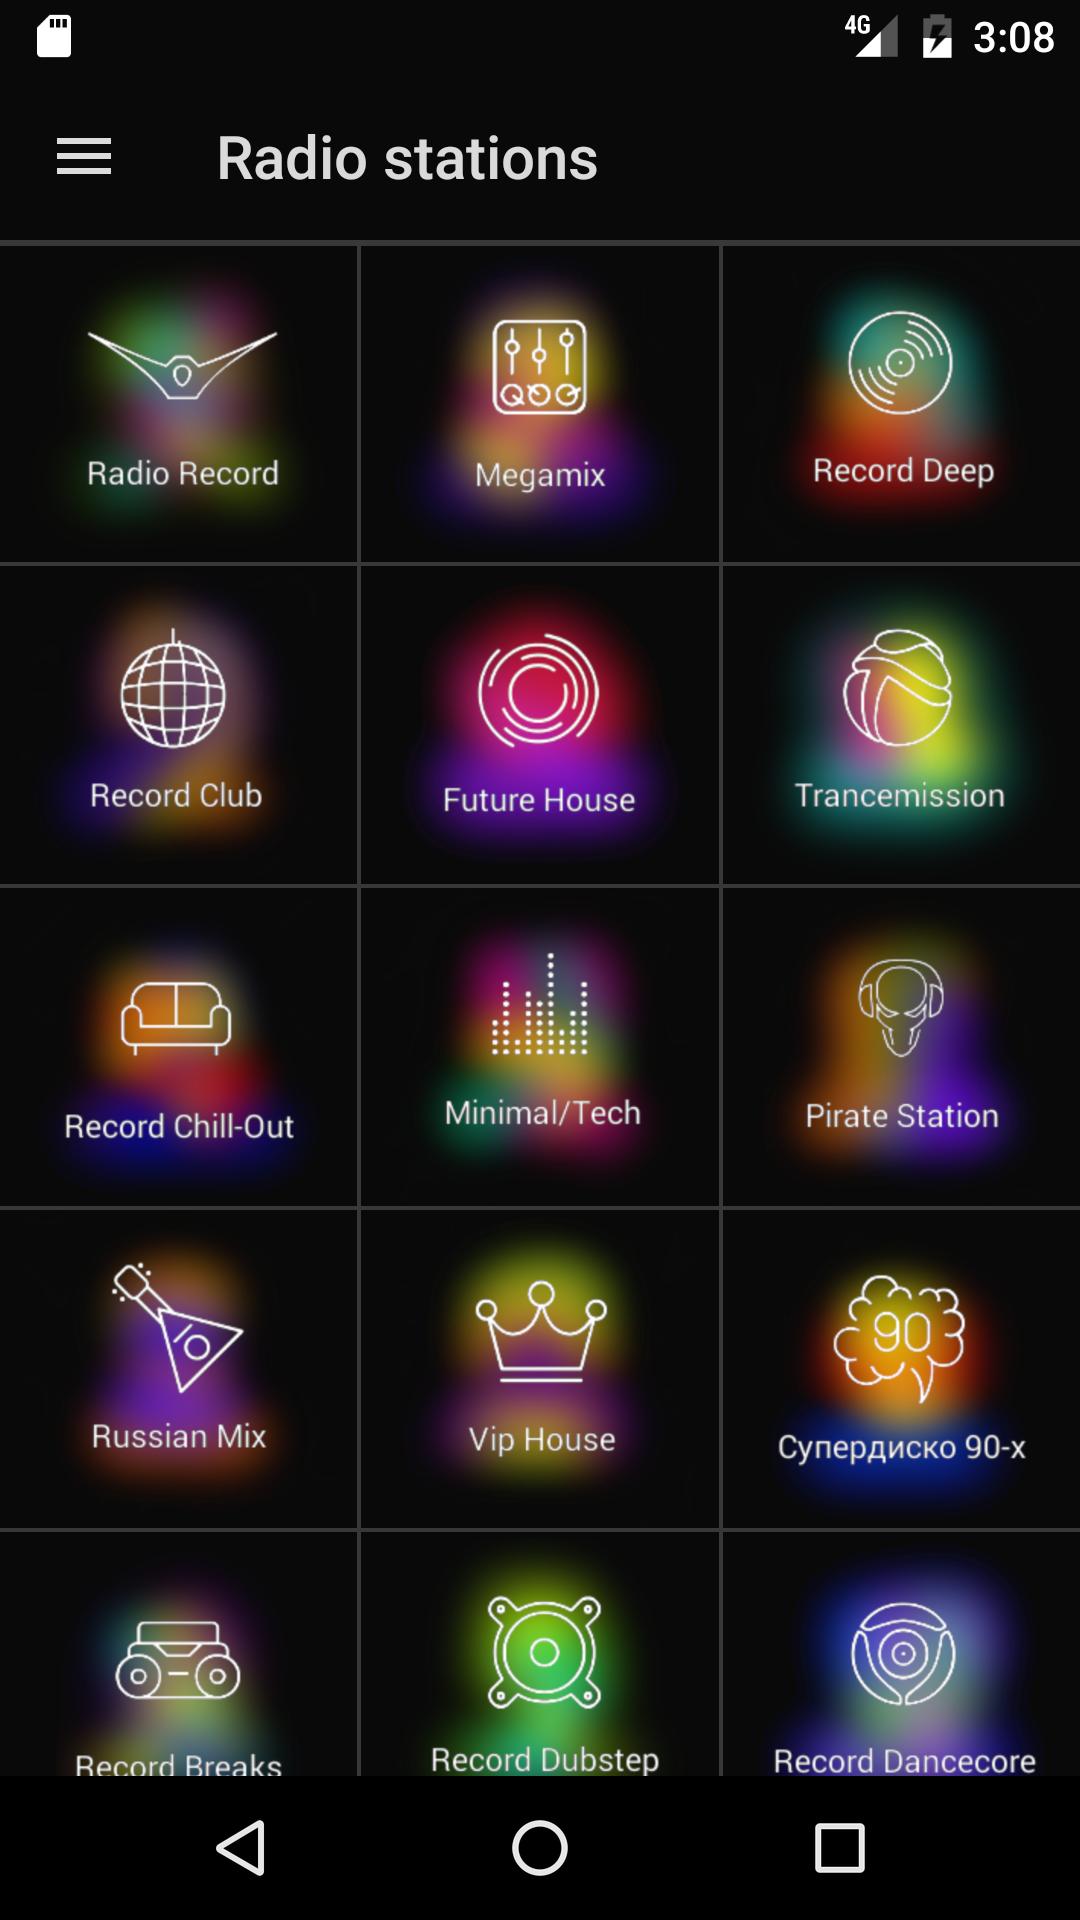 RadioRecord for Android - APK Download